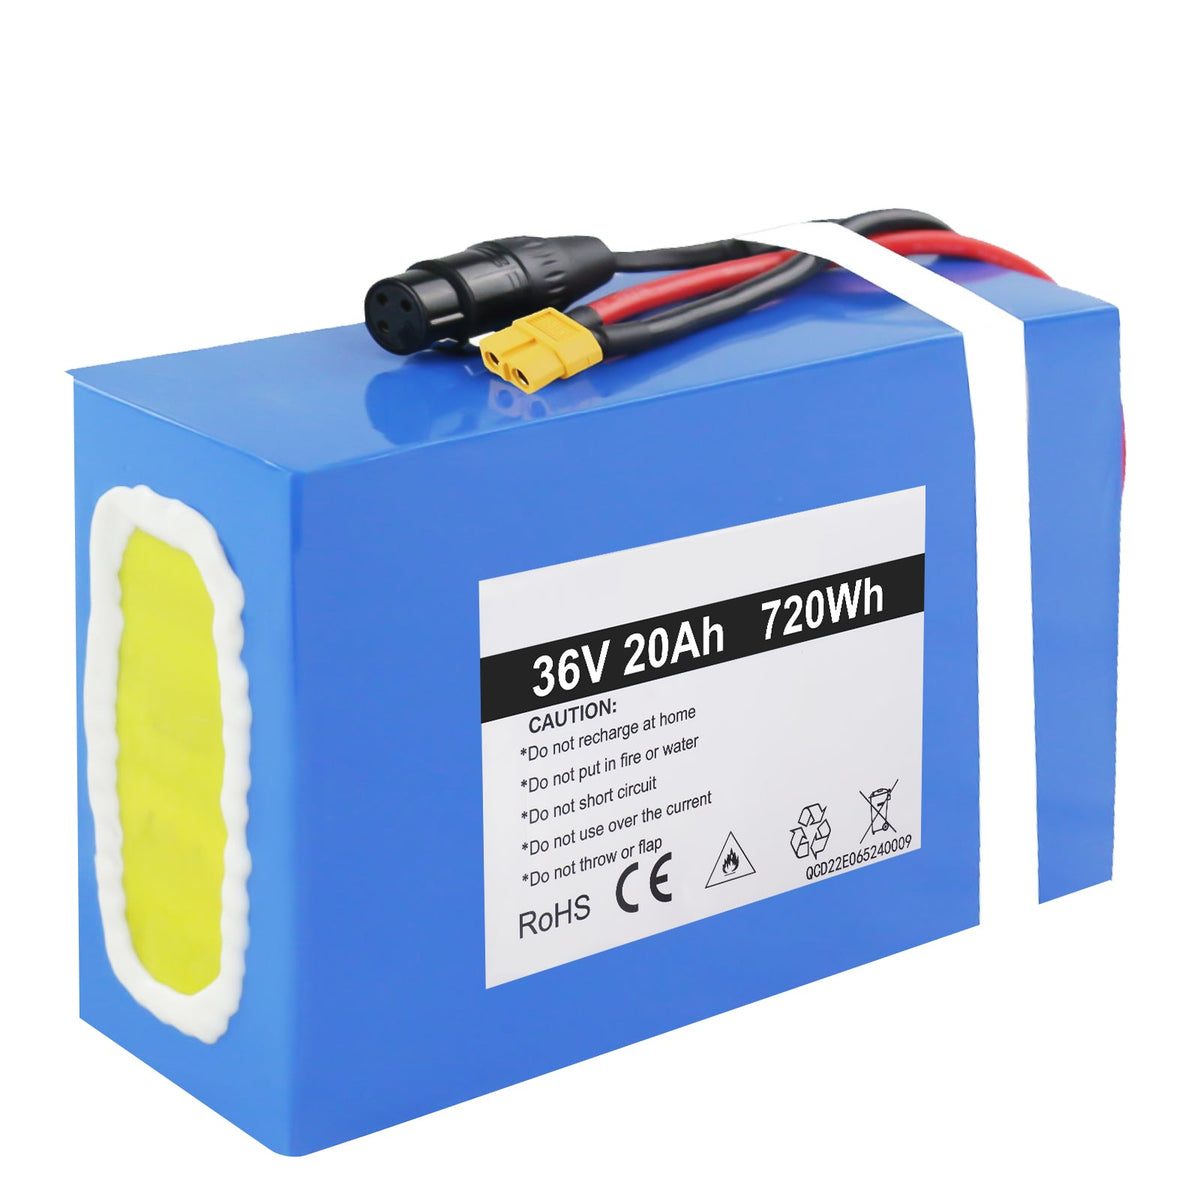 36V 20AH Ebike Battery for 1000W Ebike, Go-kart, Scooter, Waterproof Lithium Battery Pack Rechargeable with Charger 3A